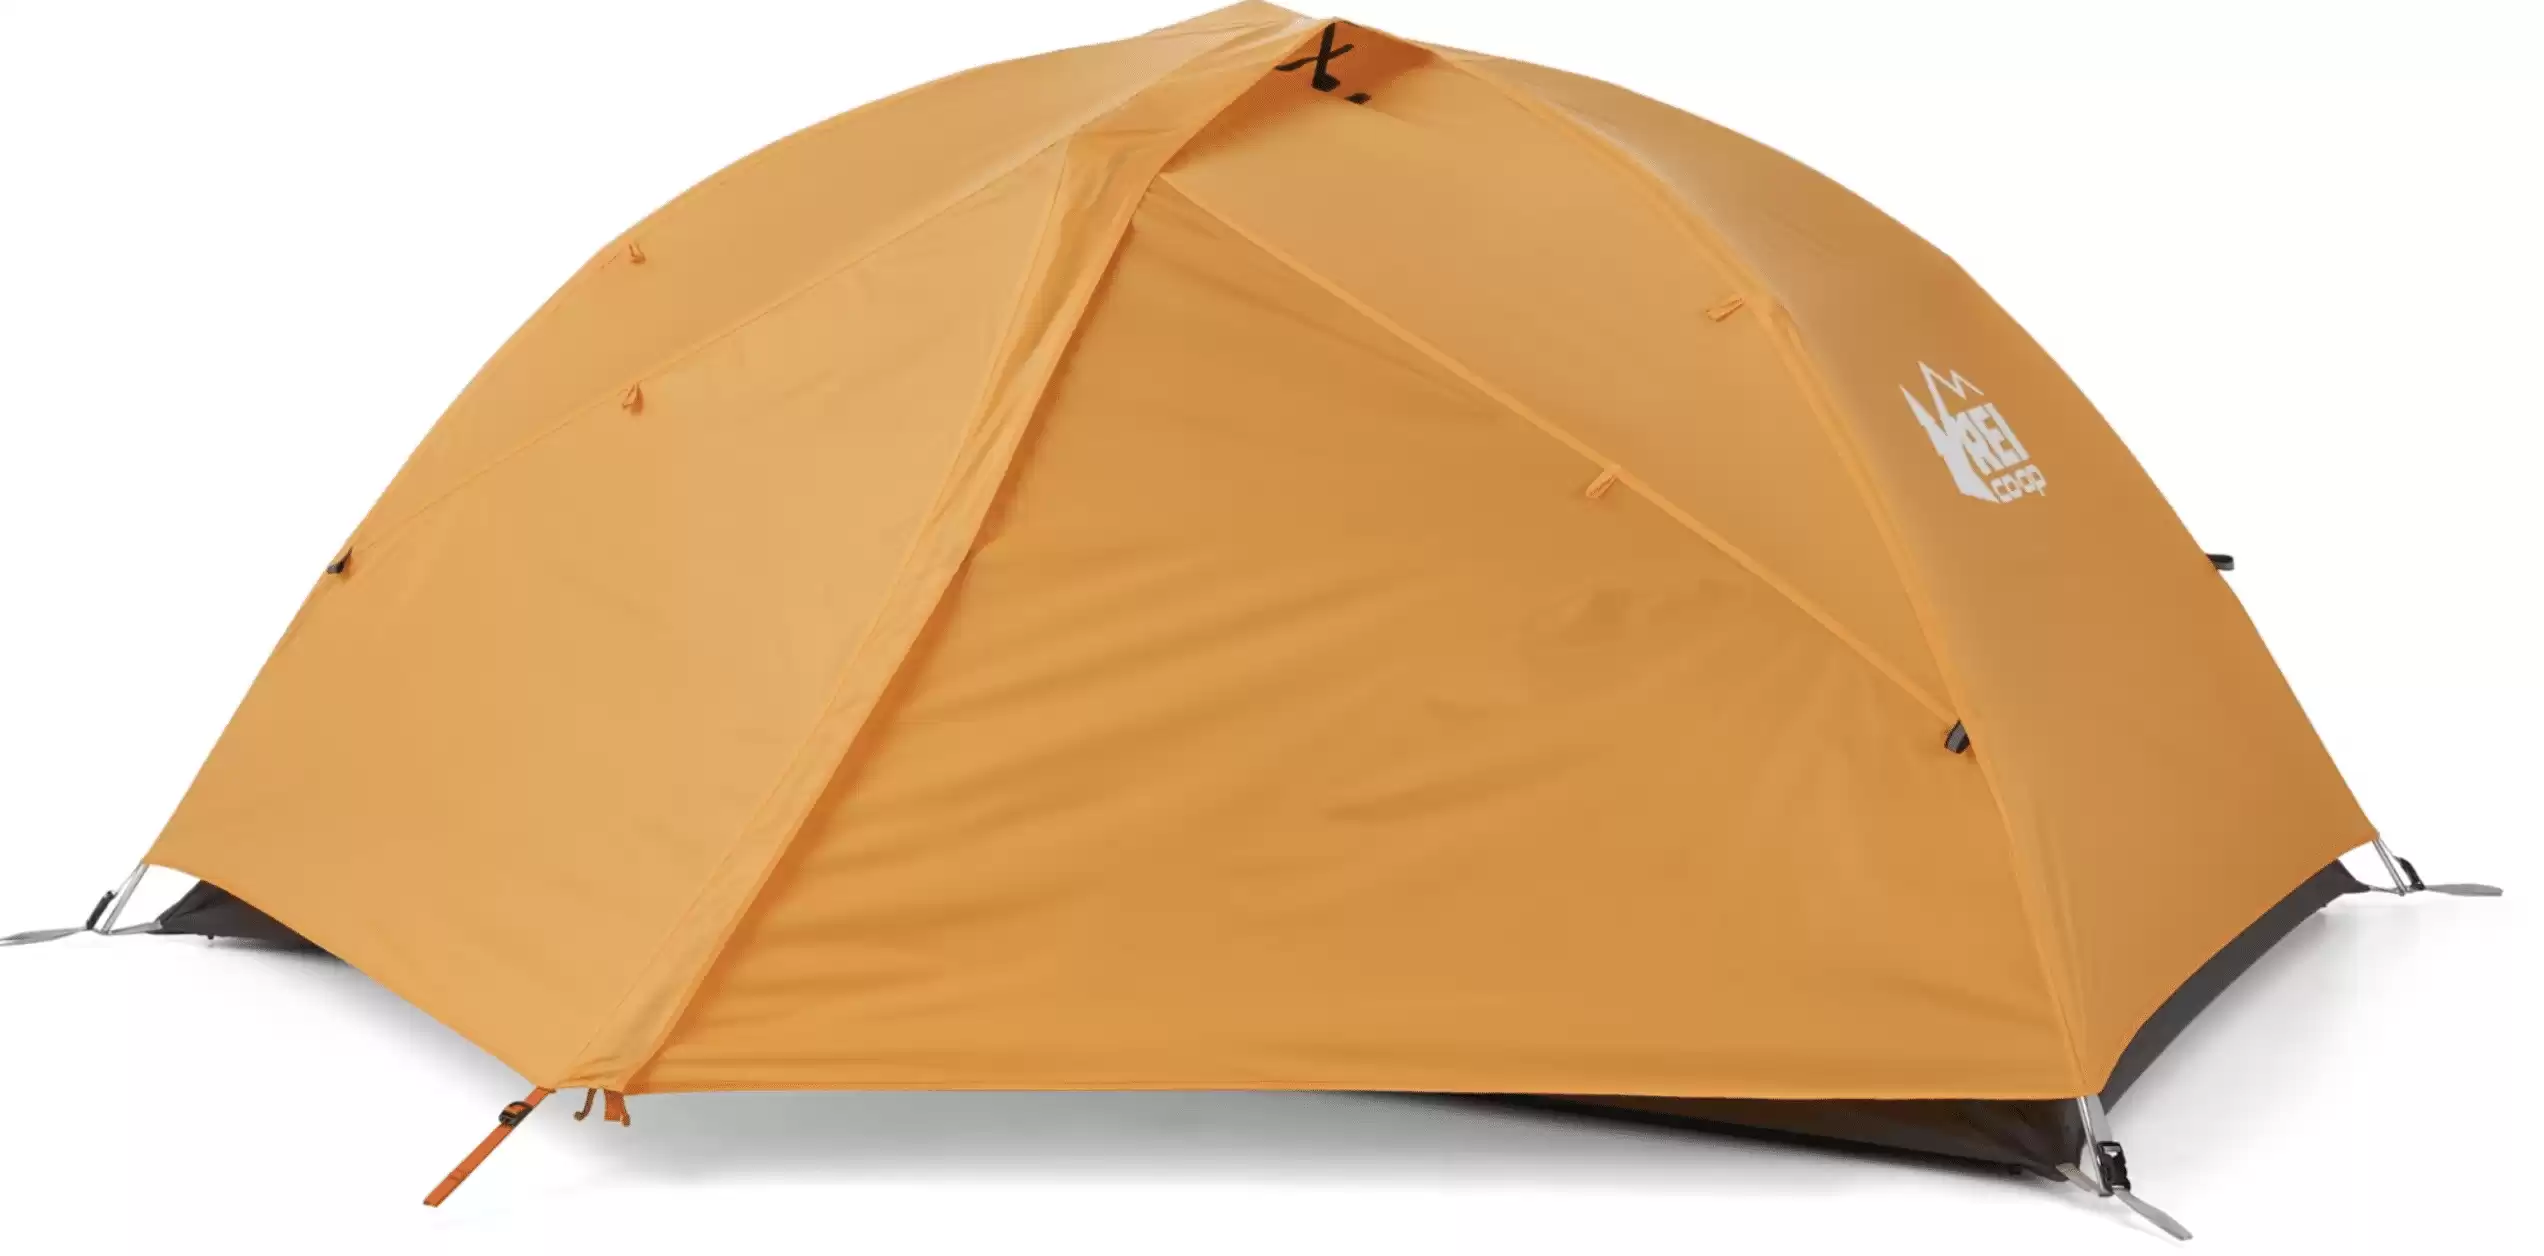 REI Co-op Trail Hut 2 Tent with Footprint